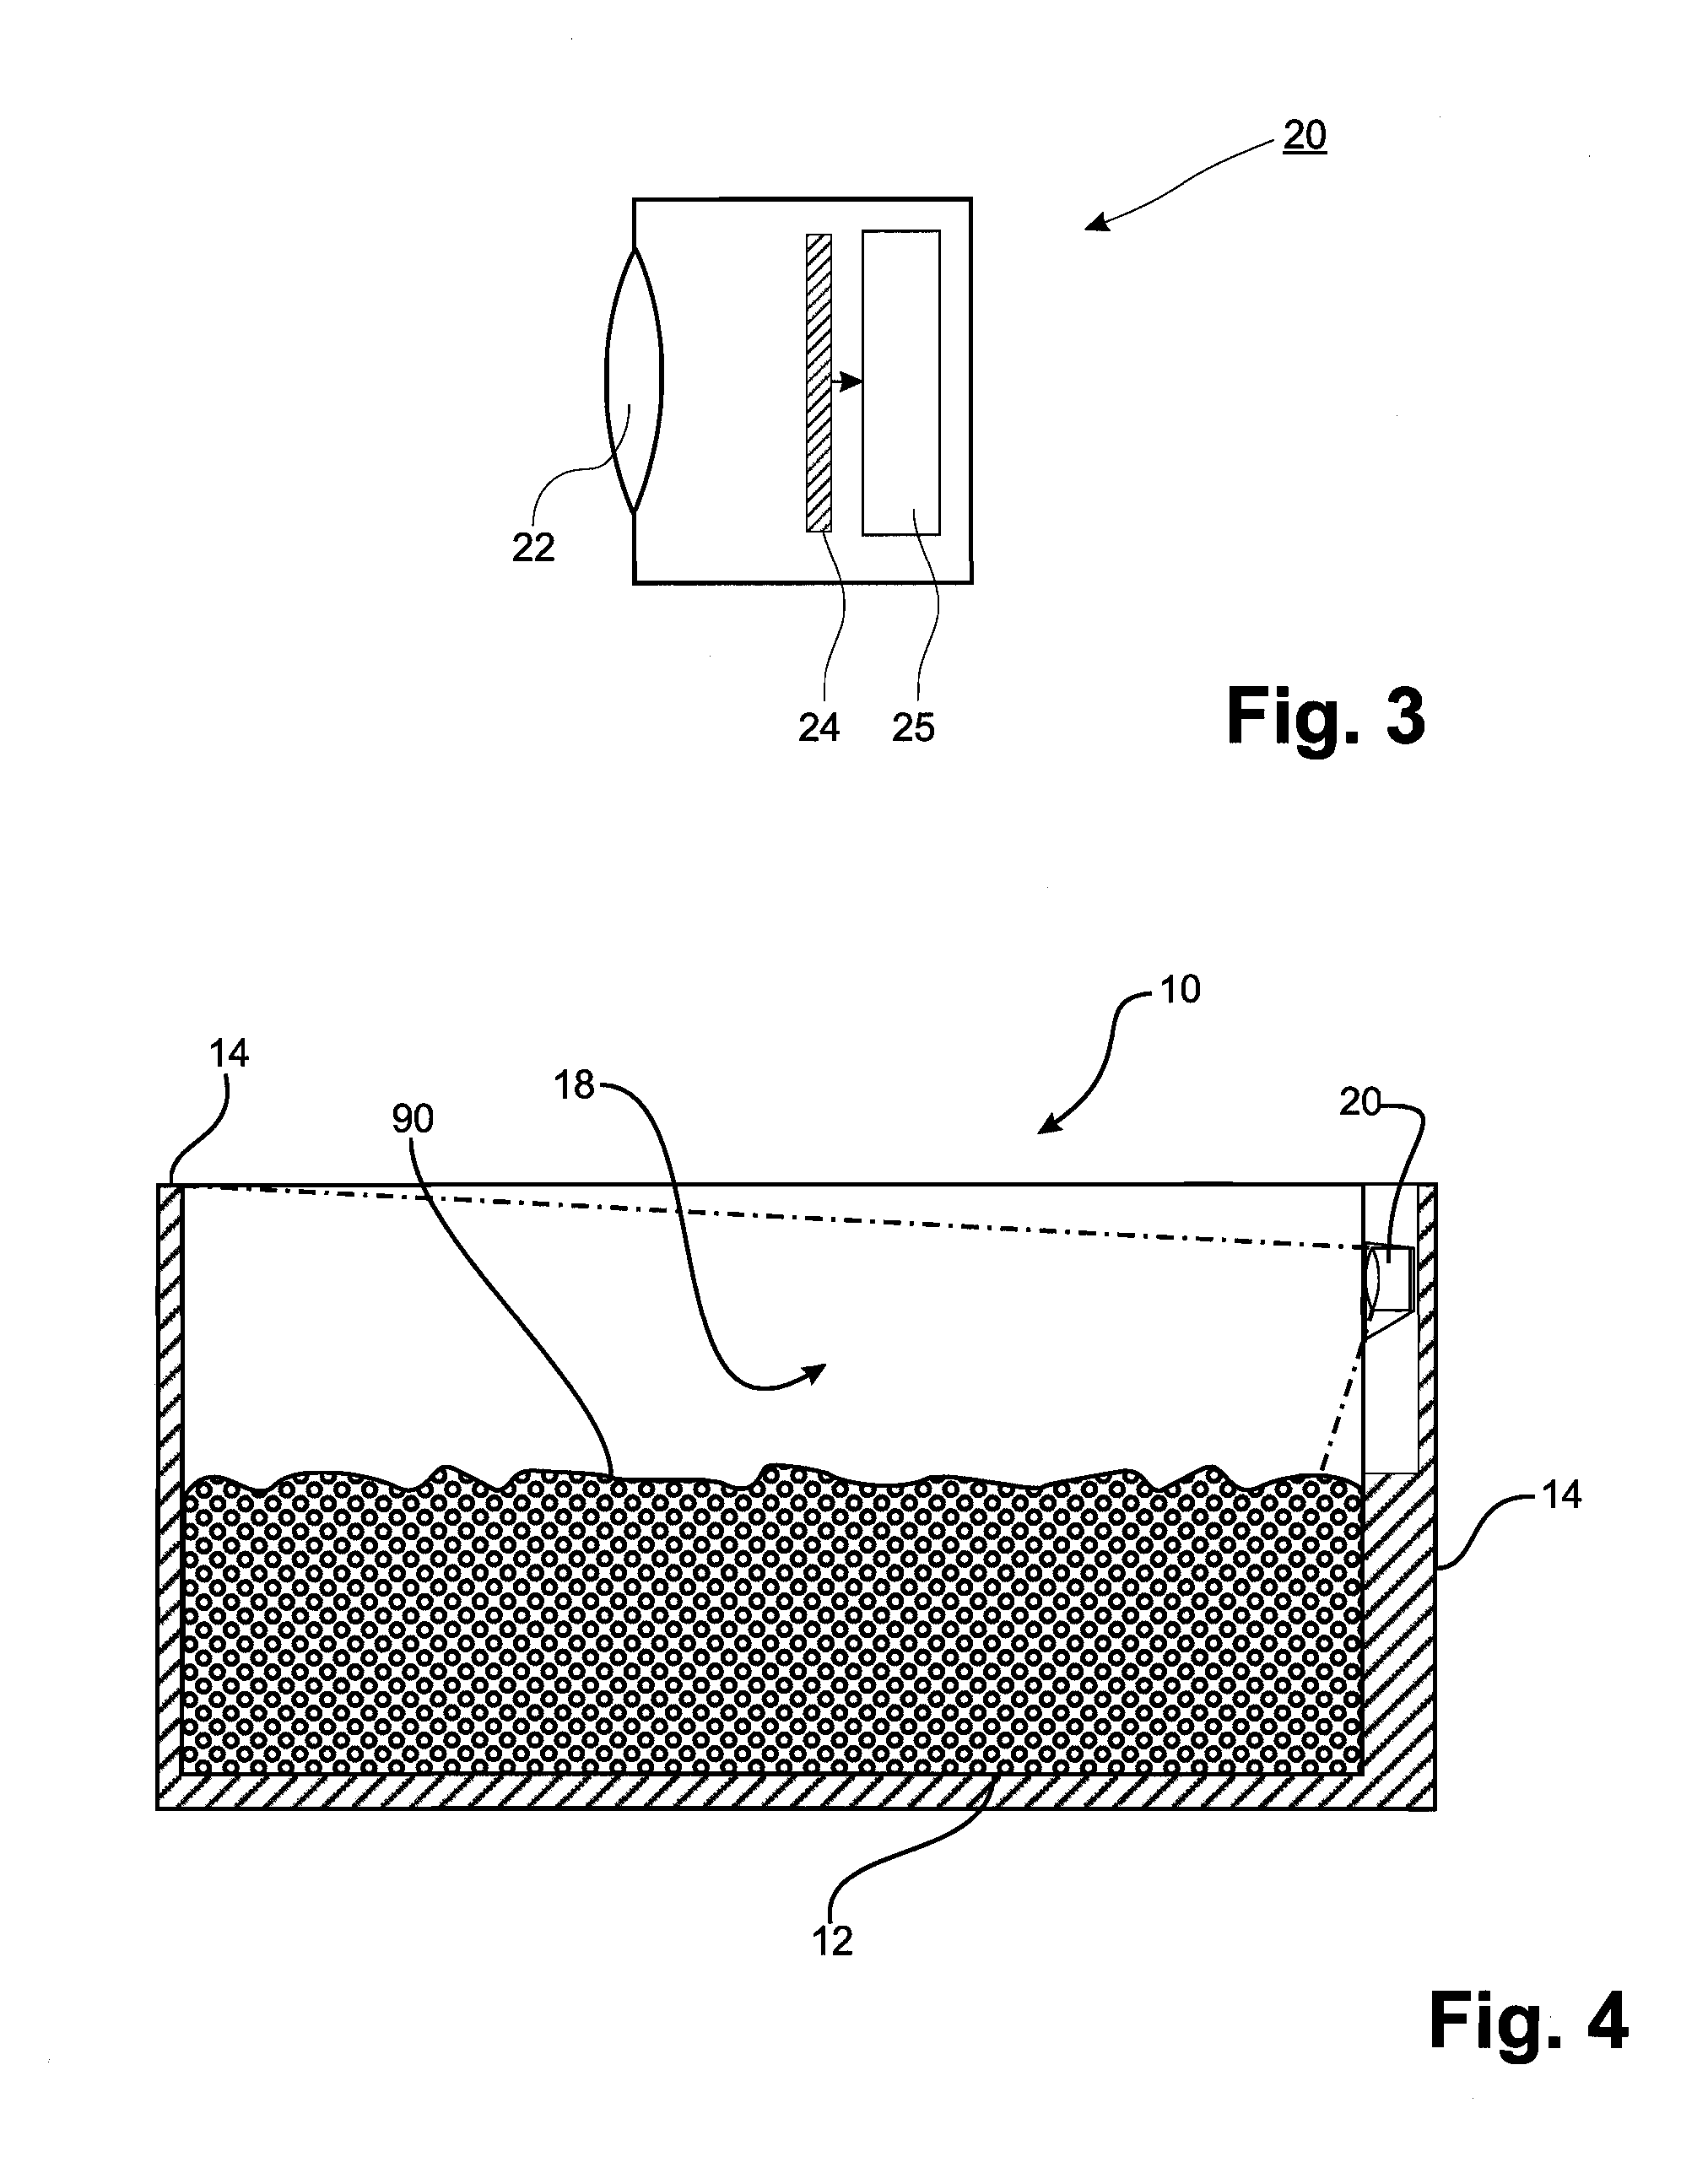 Method for dynamically detecting the fill level of a container, container therefor, and system for dynamically monitoring the fill level of a plurality of containers